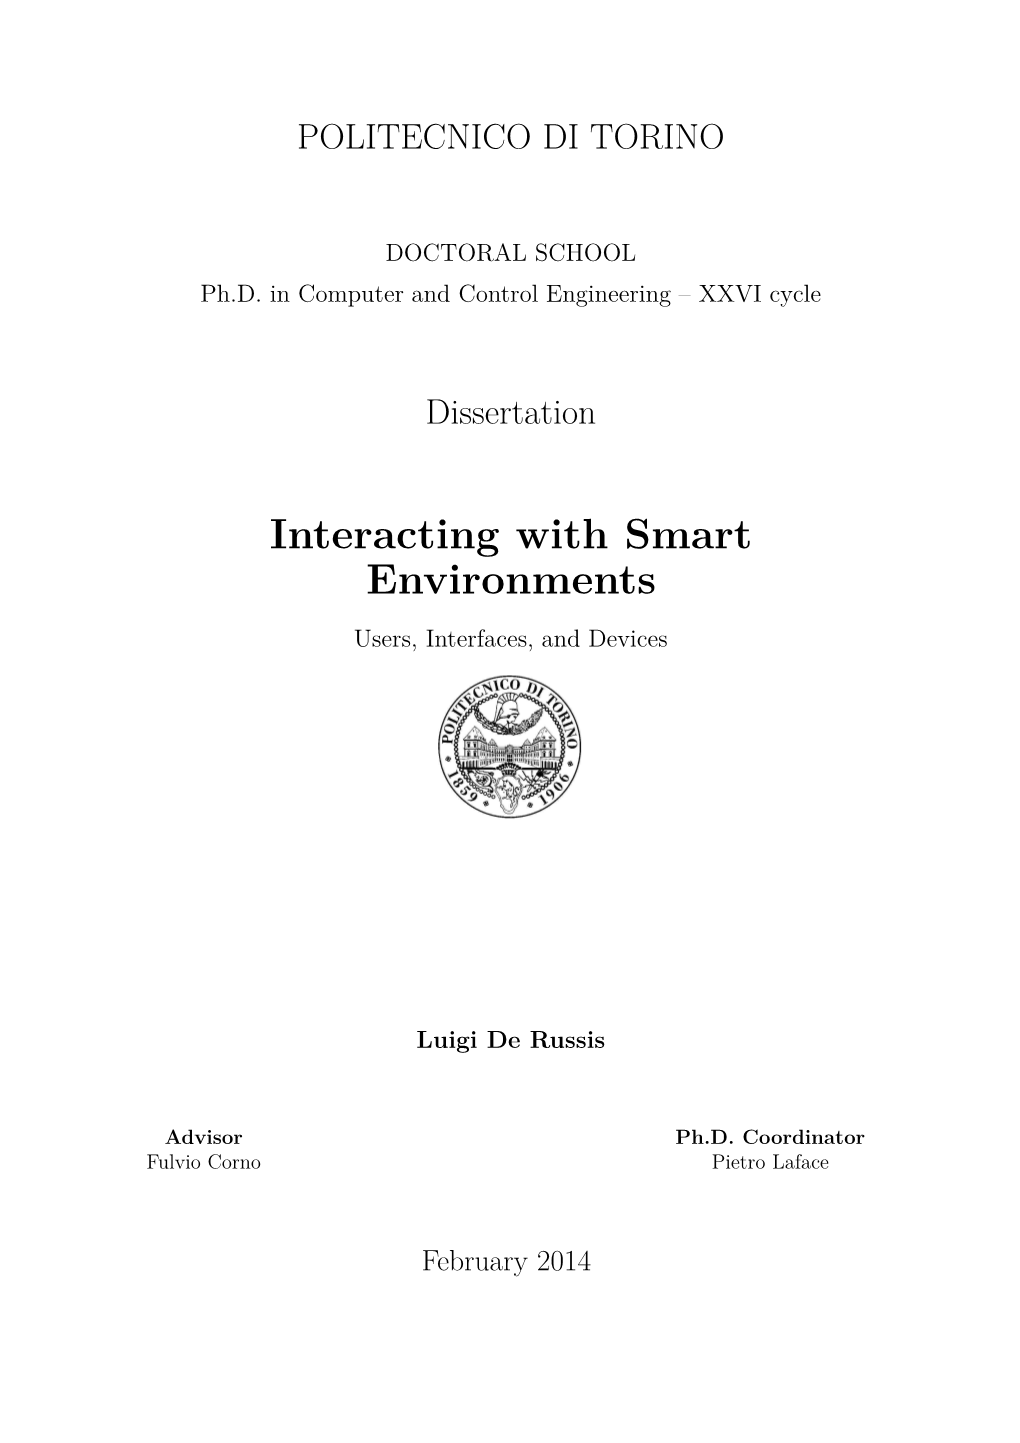 Interacting with Smart Environments